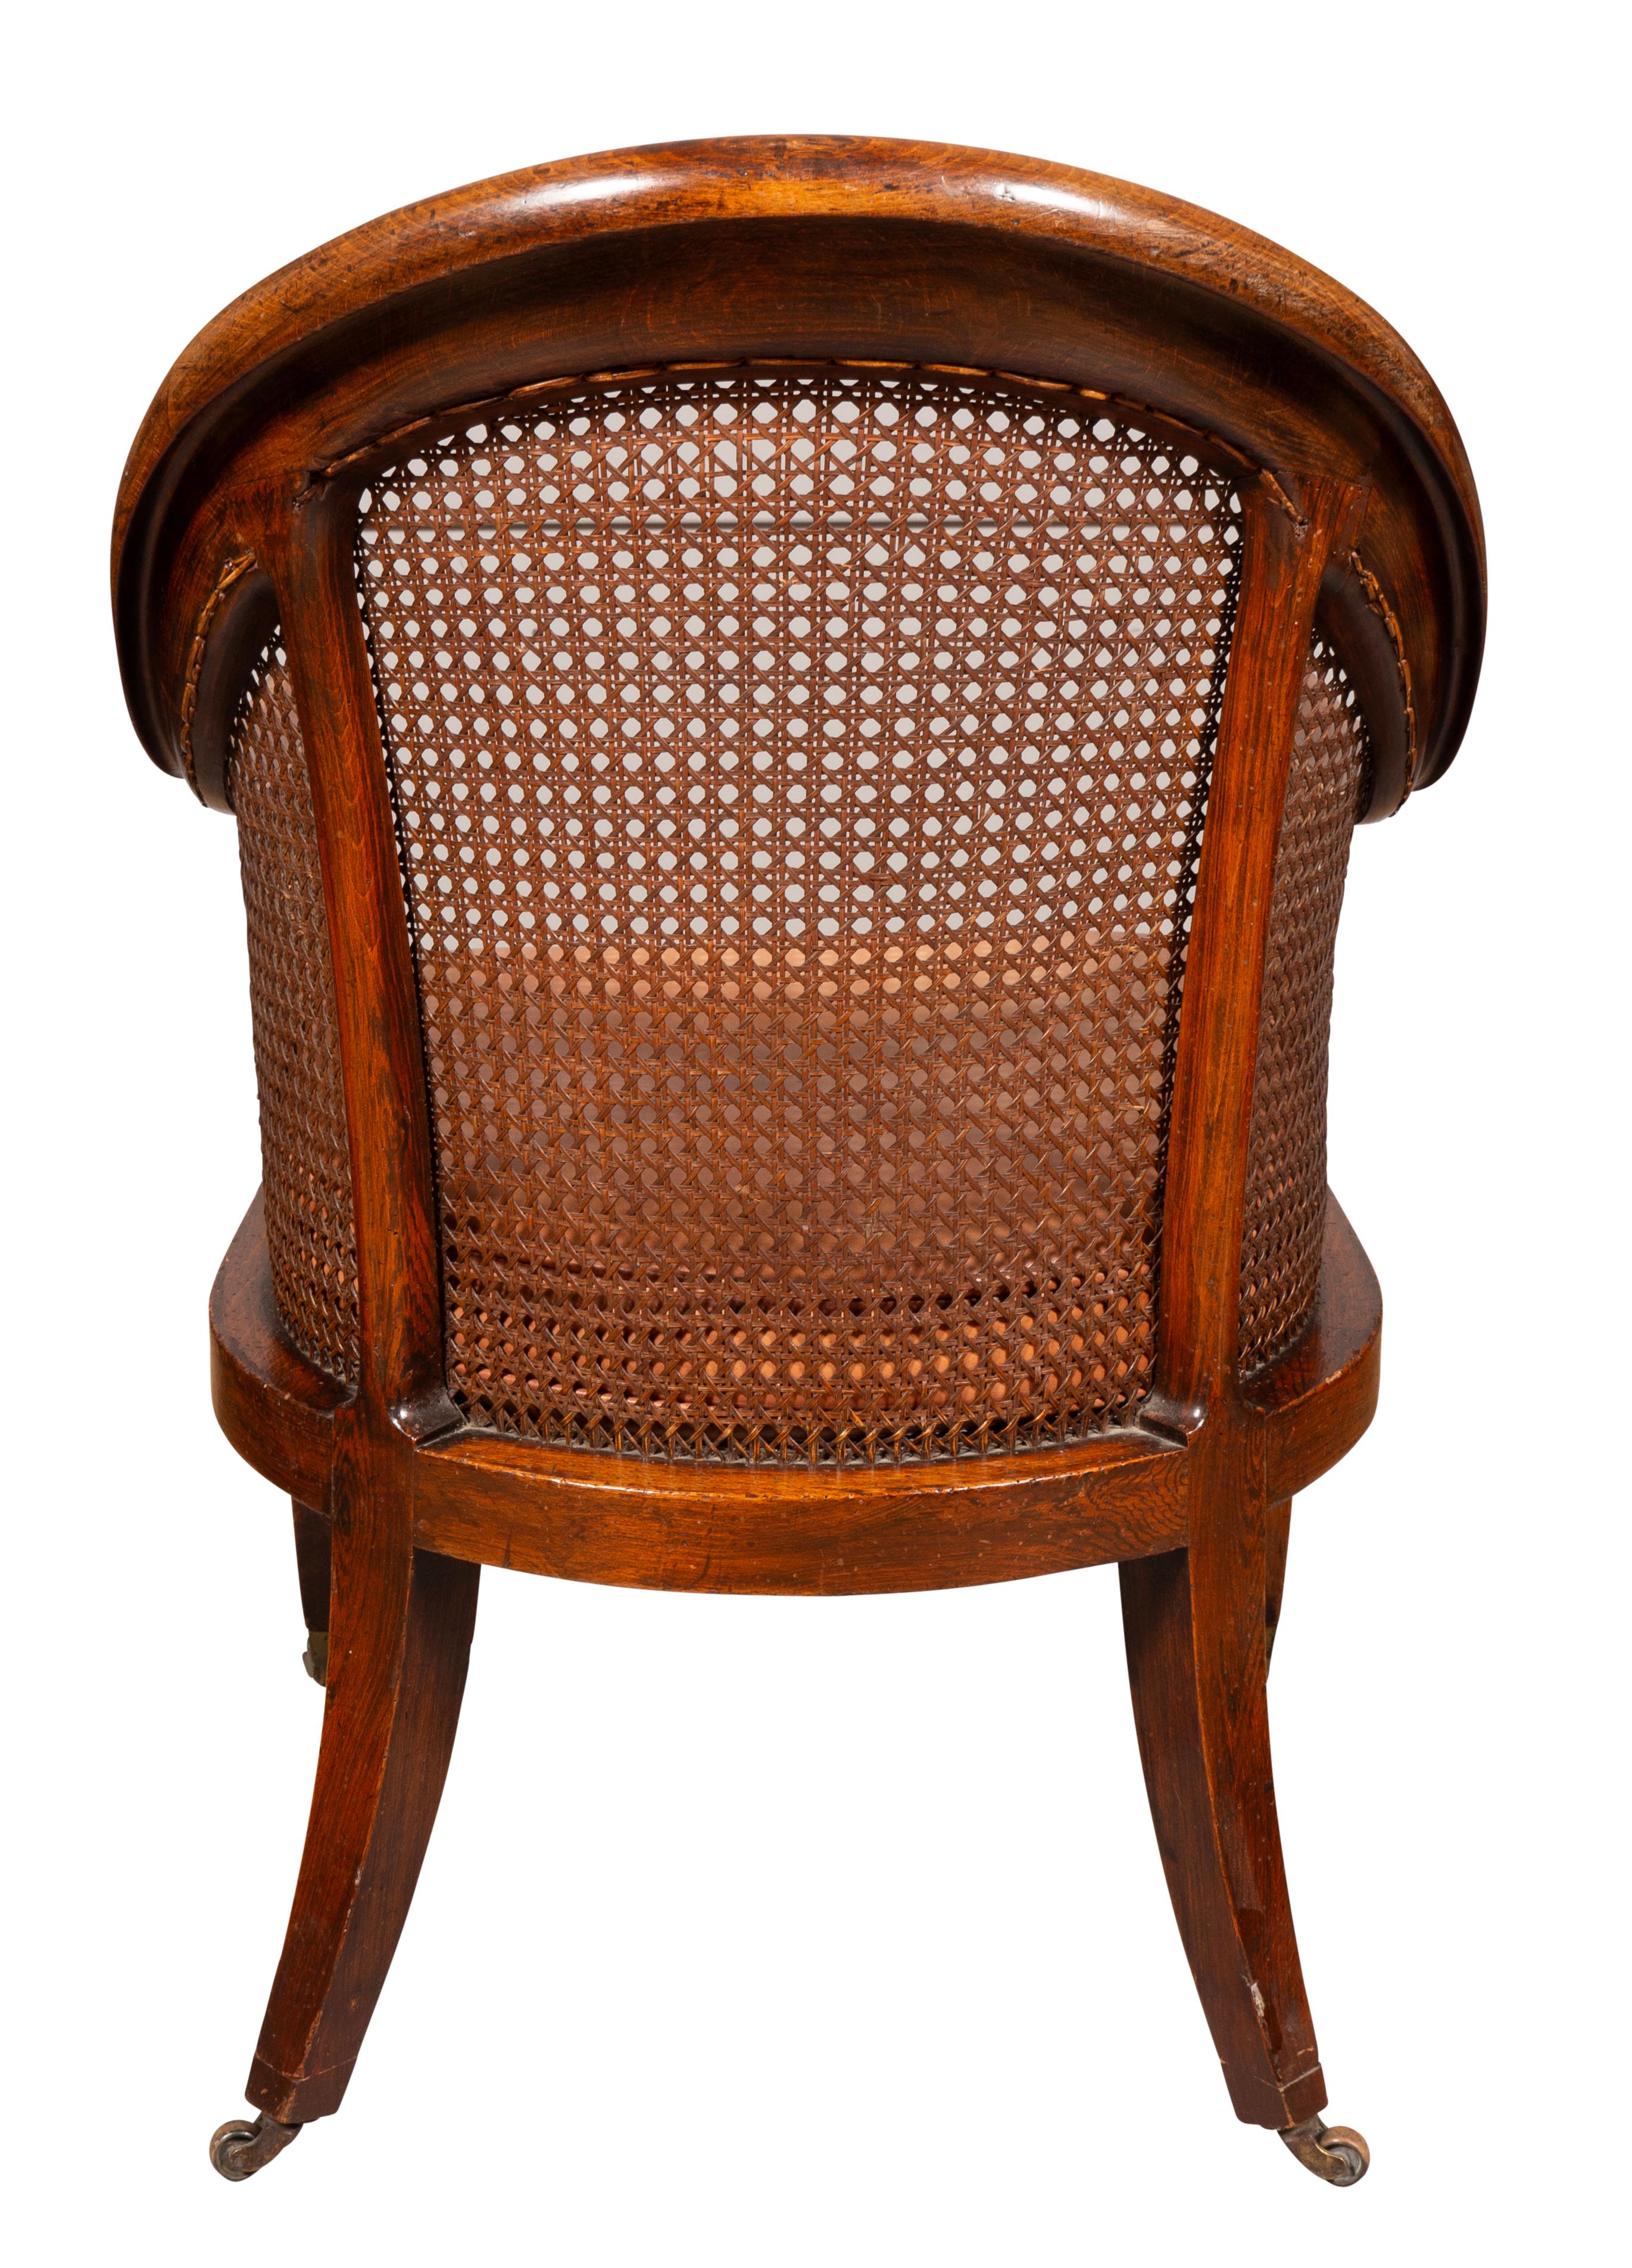 With arched back barrel form with caned back and sides, loose leather cushion and caned seat. Saber legs and casters.